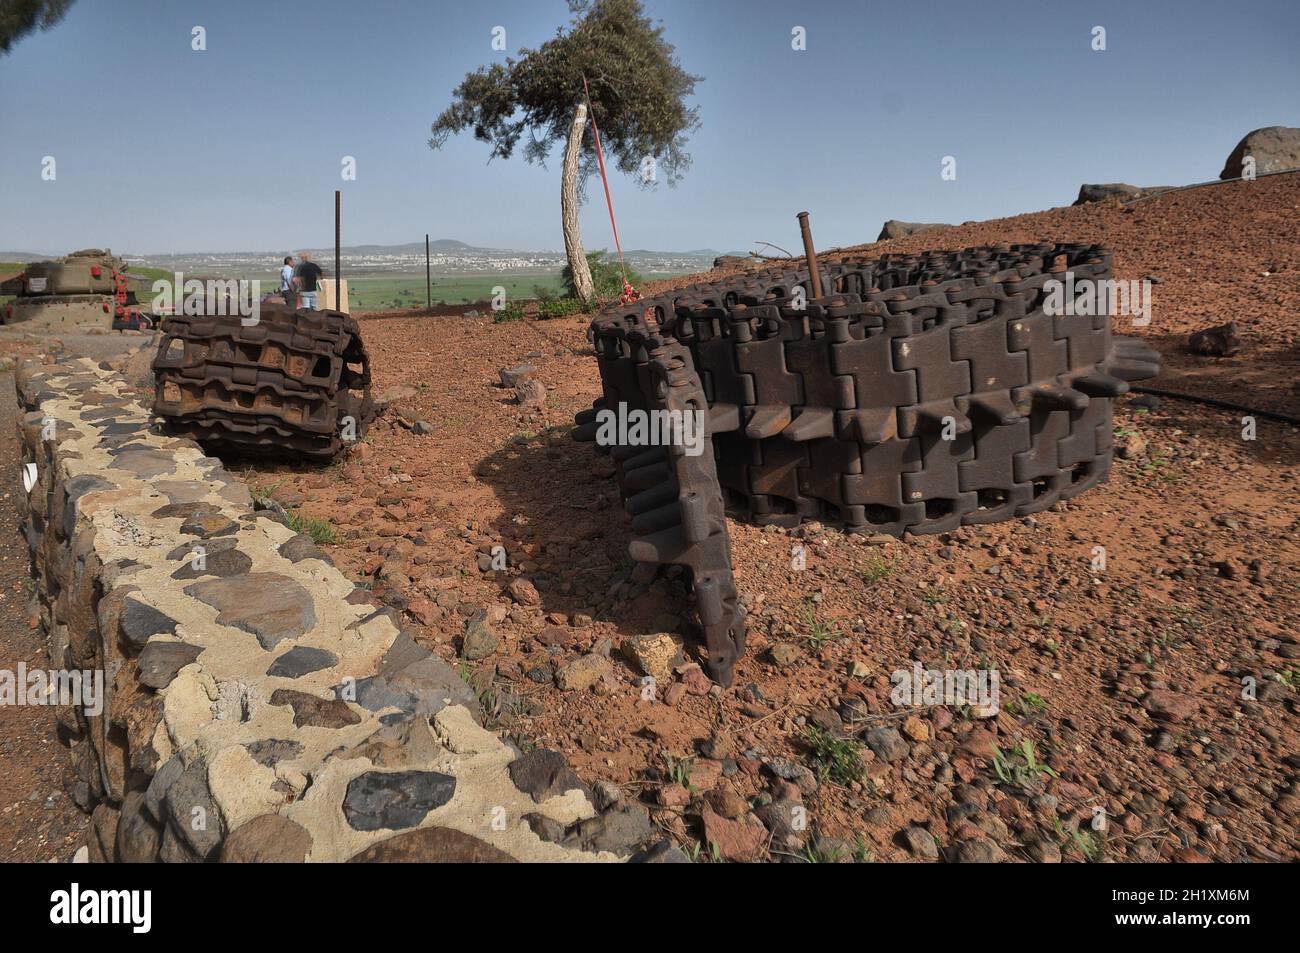 Part of Tank Memorial 'Valley of Tears', after the Yom Kippur War of 1973, Golan Heights, Israel Stock Photo